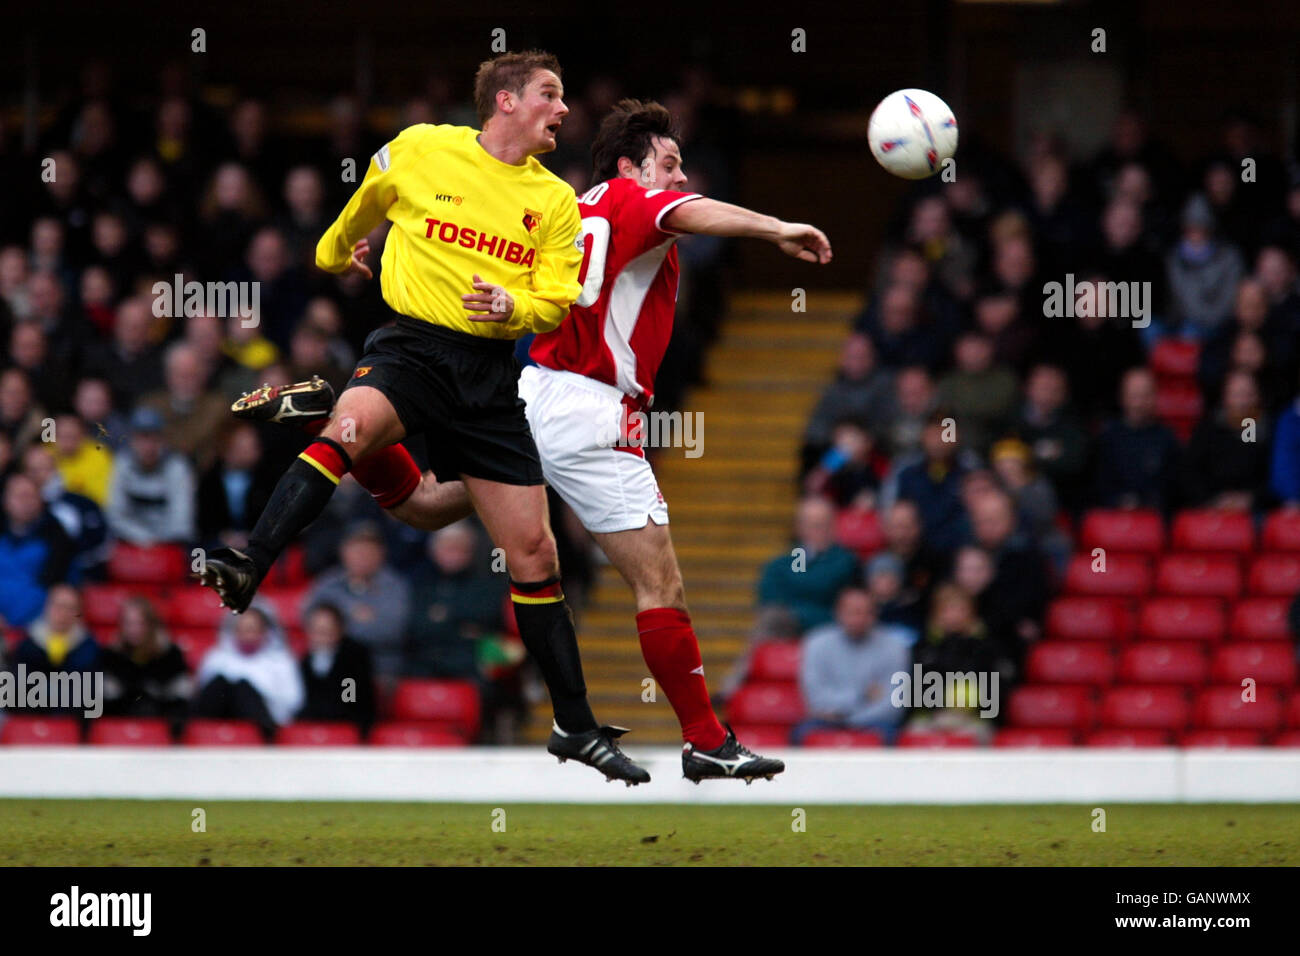 Soccer - Nationwide League Division One - Watford v Nottingham Forest. Watford's Neal Ardley (l) and Nottingham Forest's Andy Reid battle for the ball Stock Photo